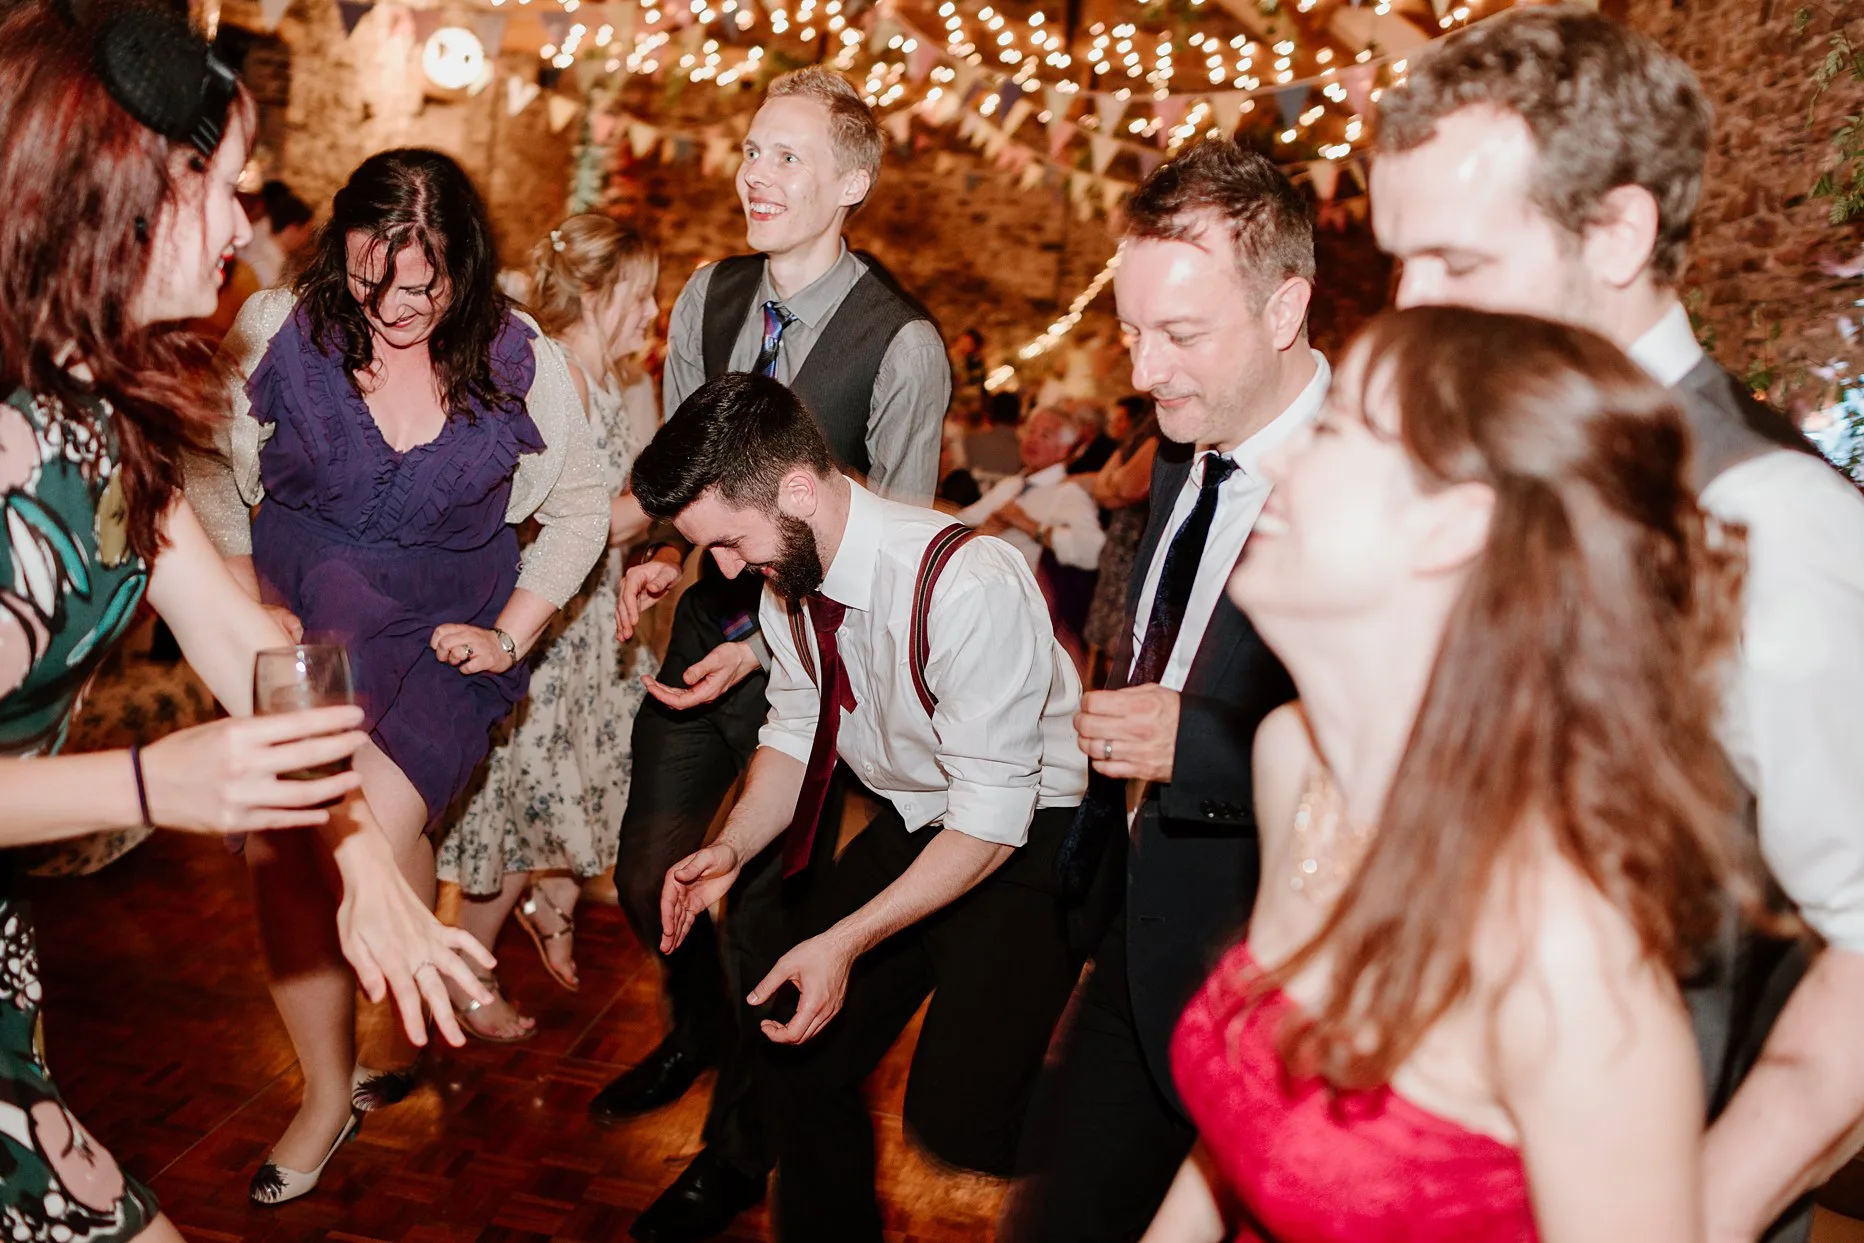 A group of wedding guests dance during the evening reception of their friends wedding. Fairy lights in the background.